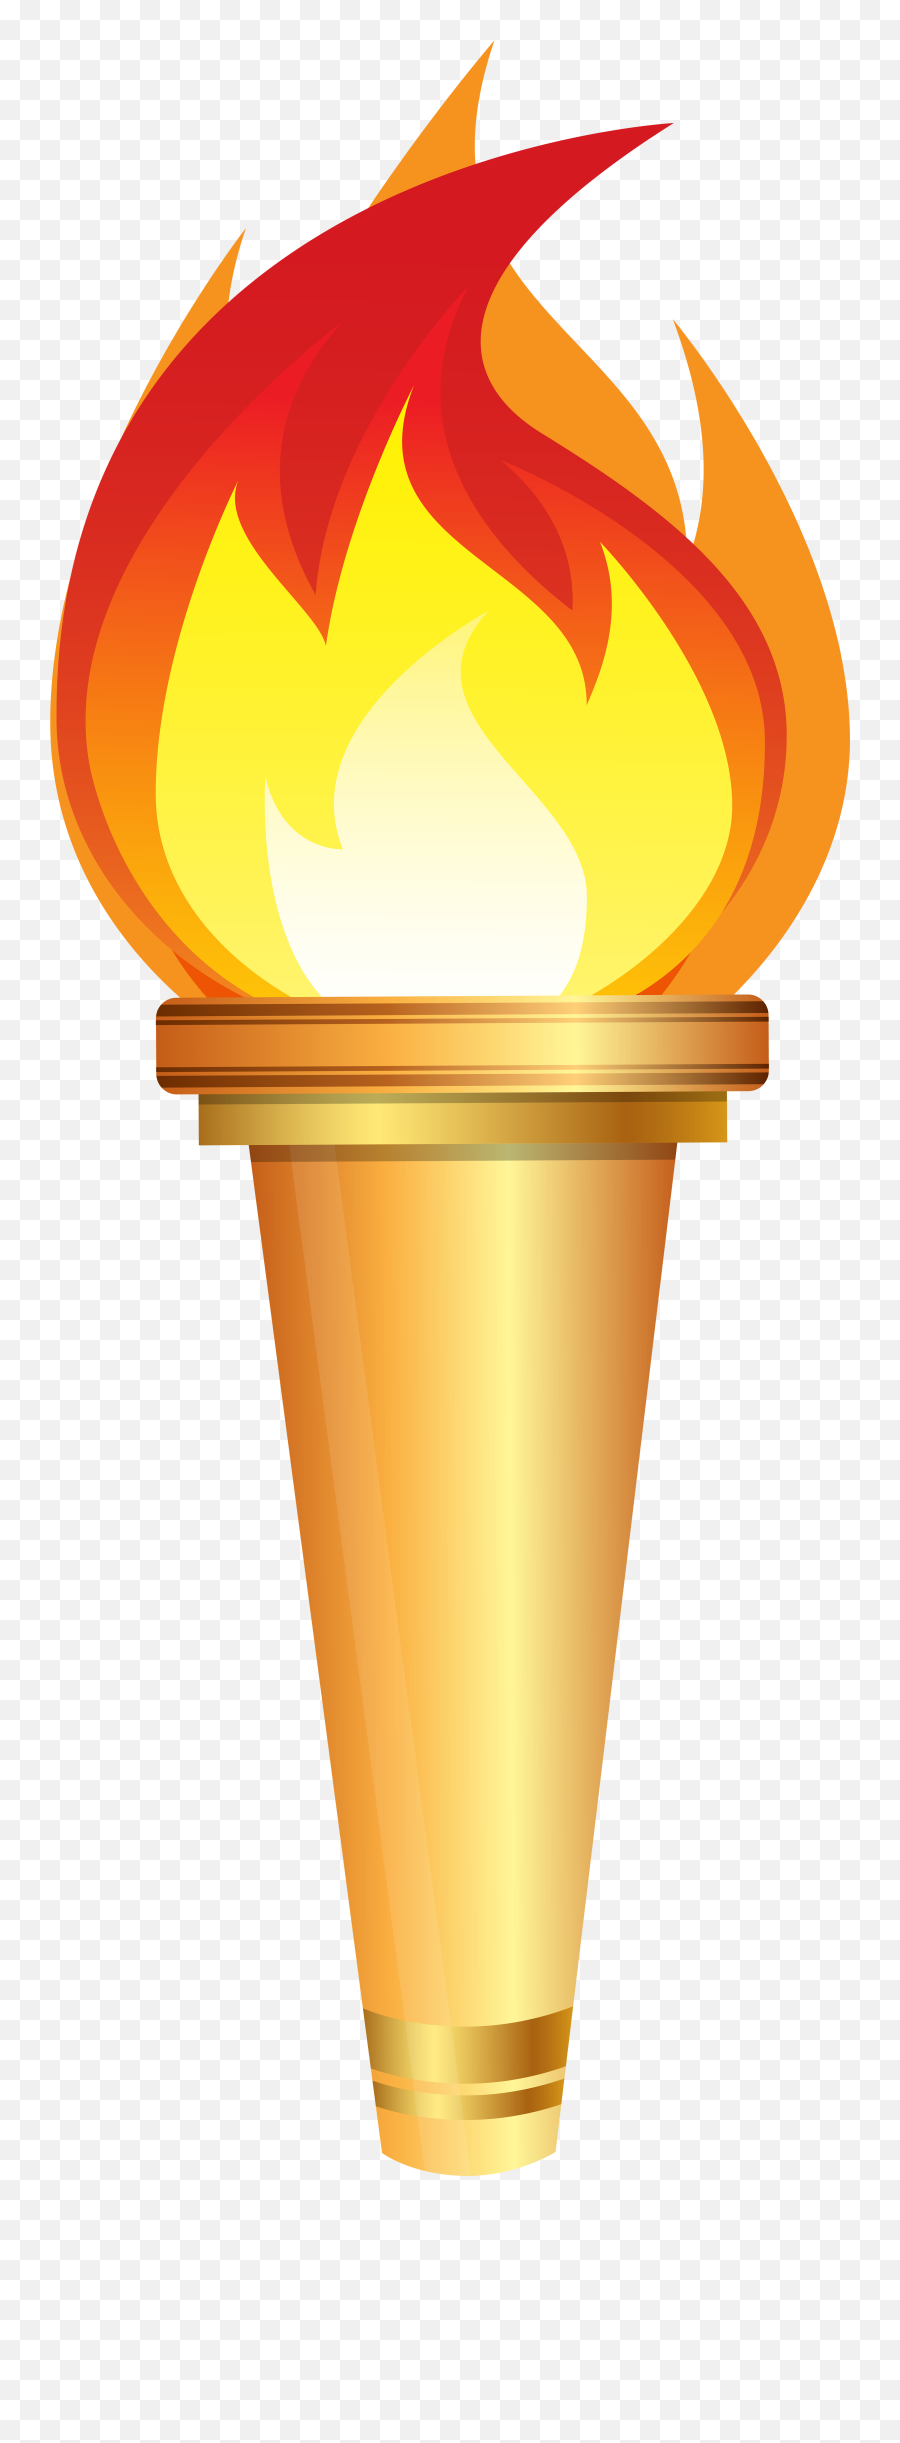 Torch Transparent Png Clipart Free - Torch Clipart,Torch Png